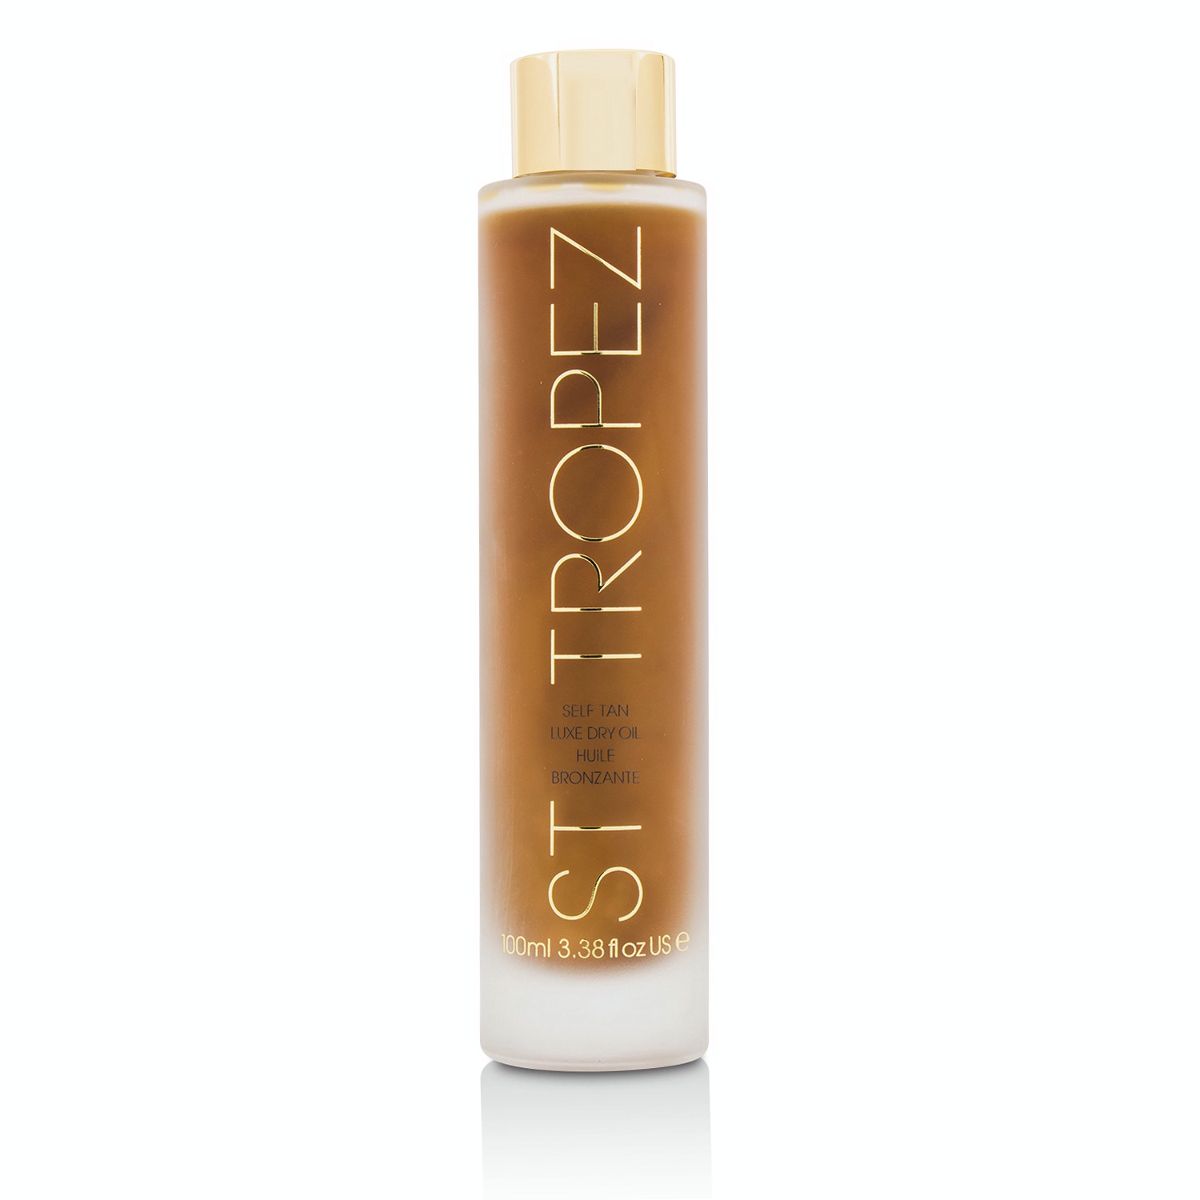 Self Tan Luxe Dry Oil St. Tropez Image